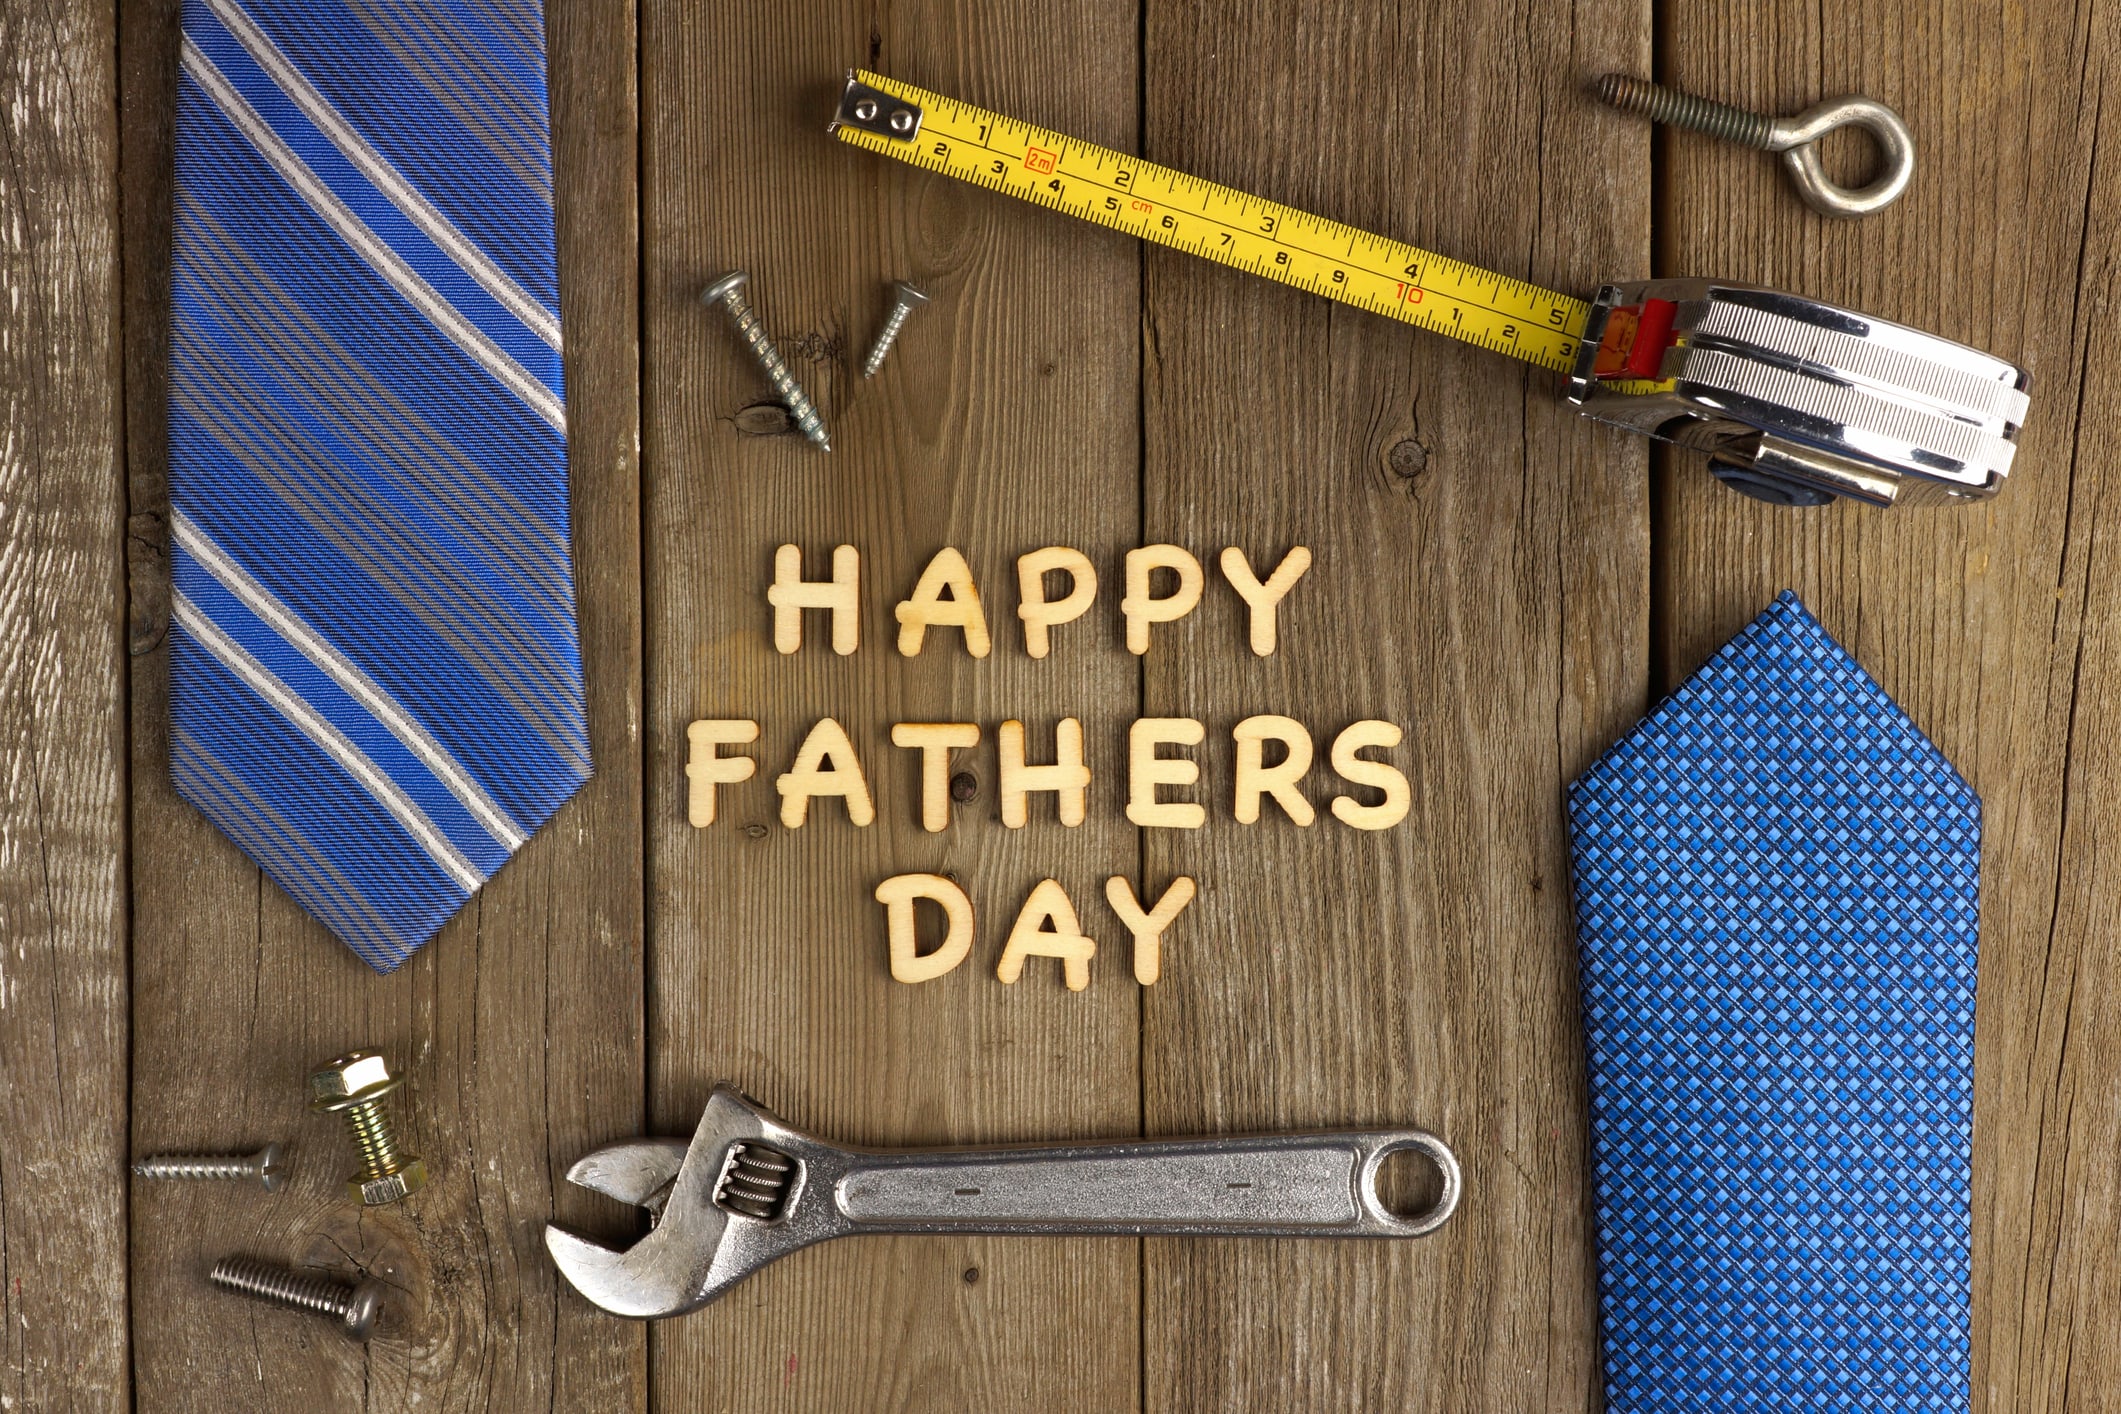 Father's Day Home Depot Sale [] ROSS BUILDING STORE